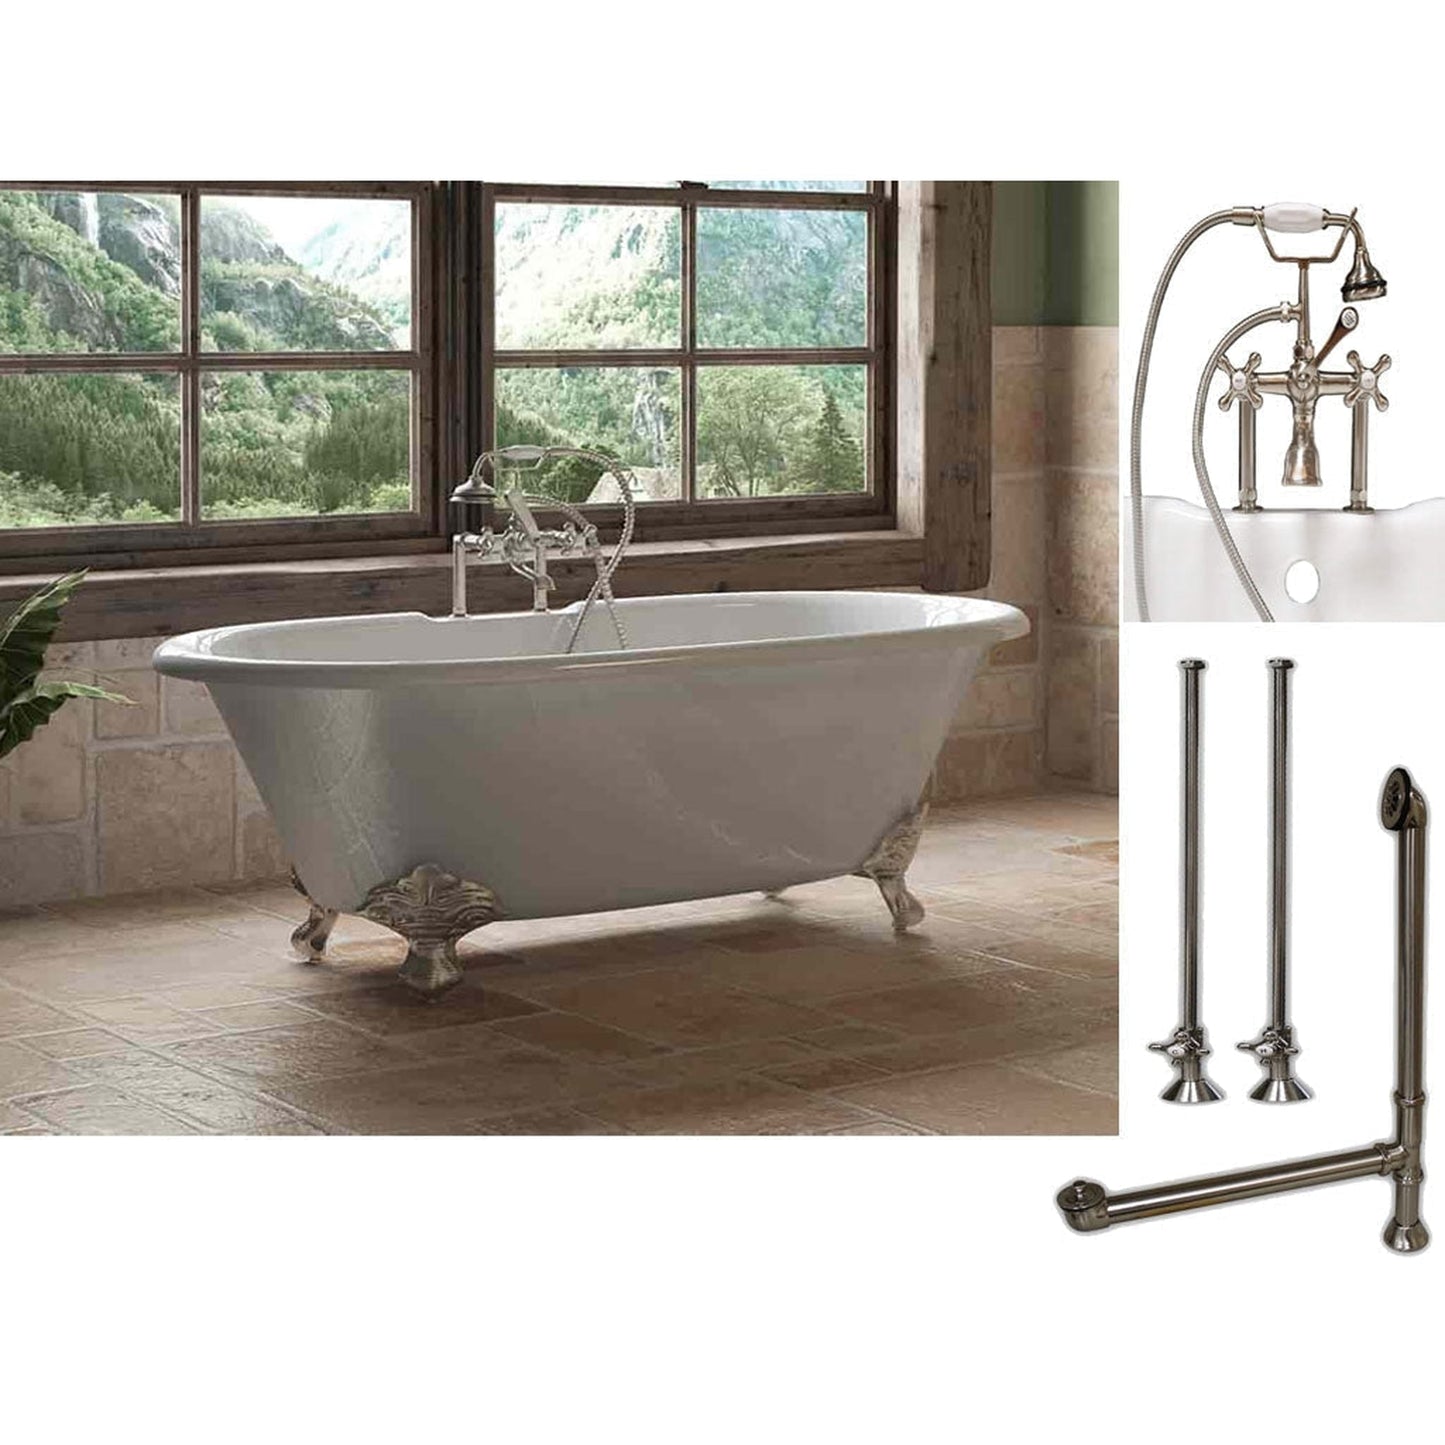 Cambridge Plumbing 60" White Cast Iron Double Ended Clawfoot Bathtub With Deck Holes And Complete Plumbing Package Including 6” Riser Deck Mount Faucet, Supply Lines, Drain And Overflow Assembly In Brushed Nickel